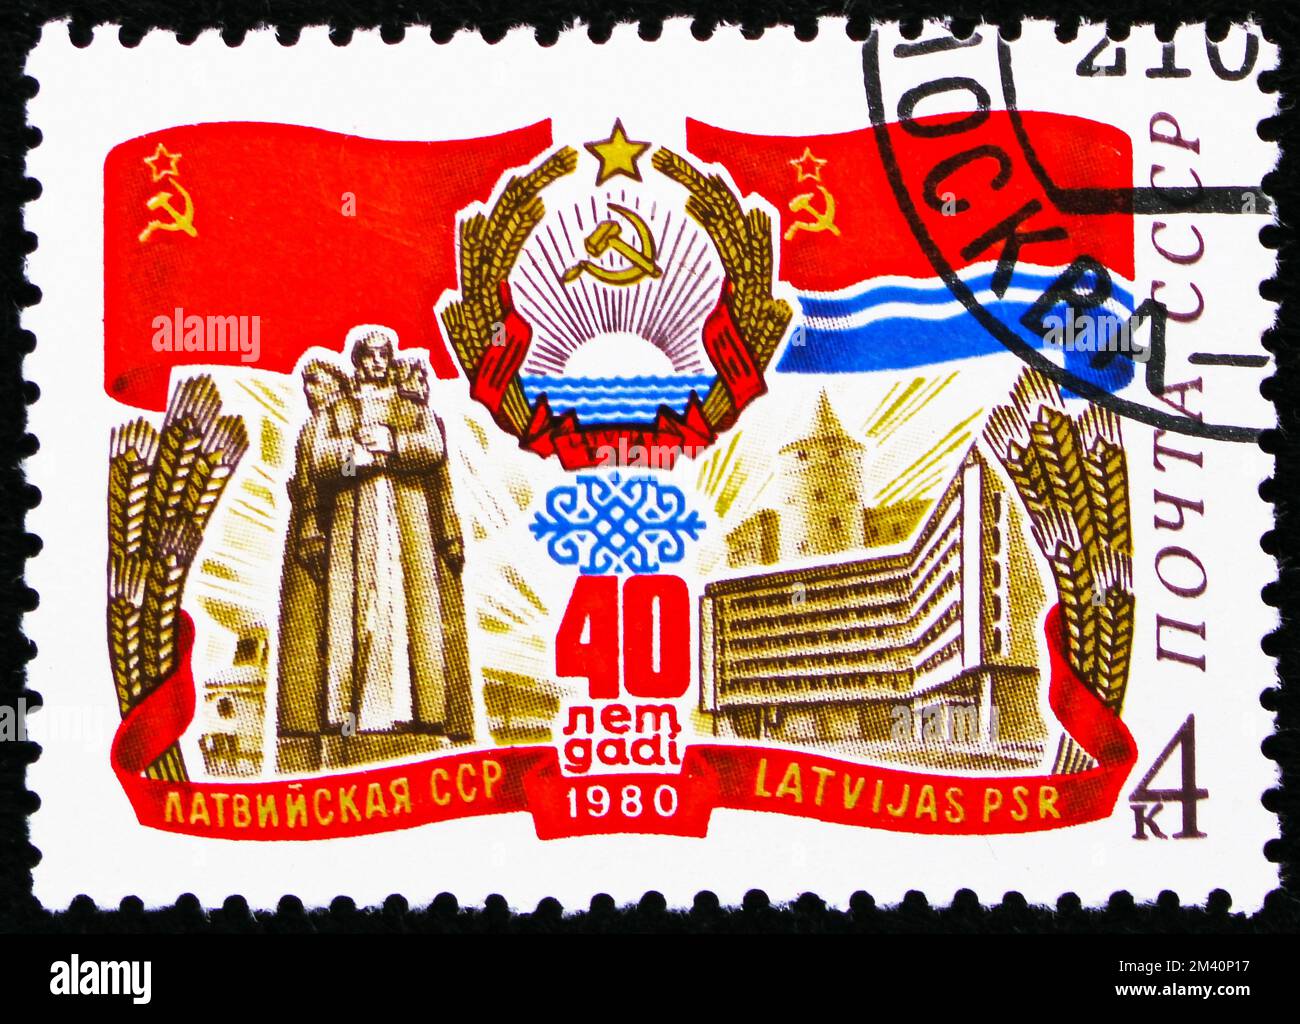 MOSCOW, RUSSIA - OCTOBER 29, 2022: Postage stamp printed in USSR devoted to 40th Anniversary of Latvian SSR, Soviet Republics serie, circa 1980 Stock Photo